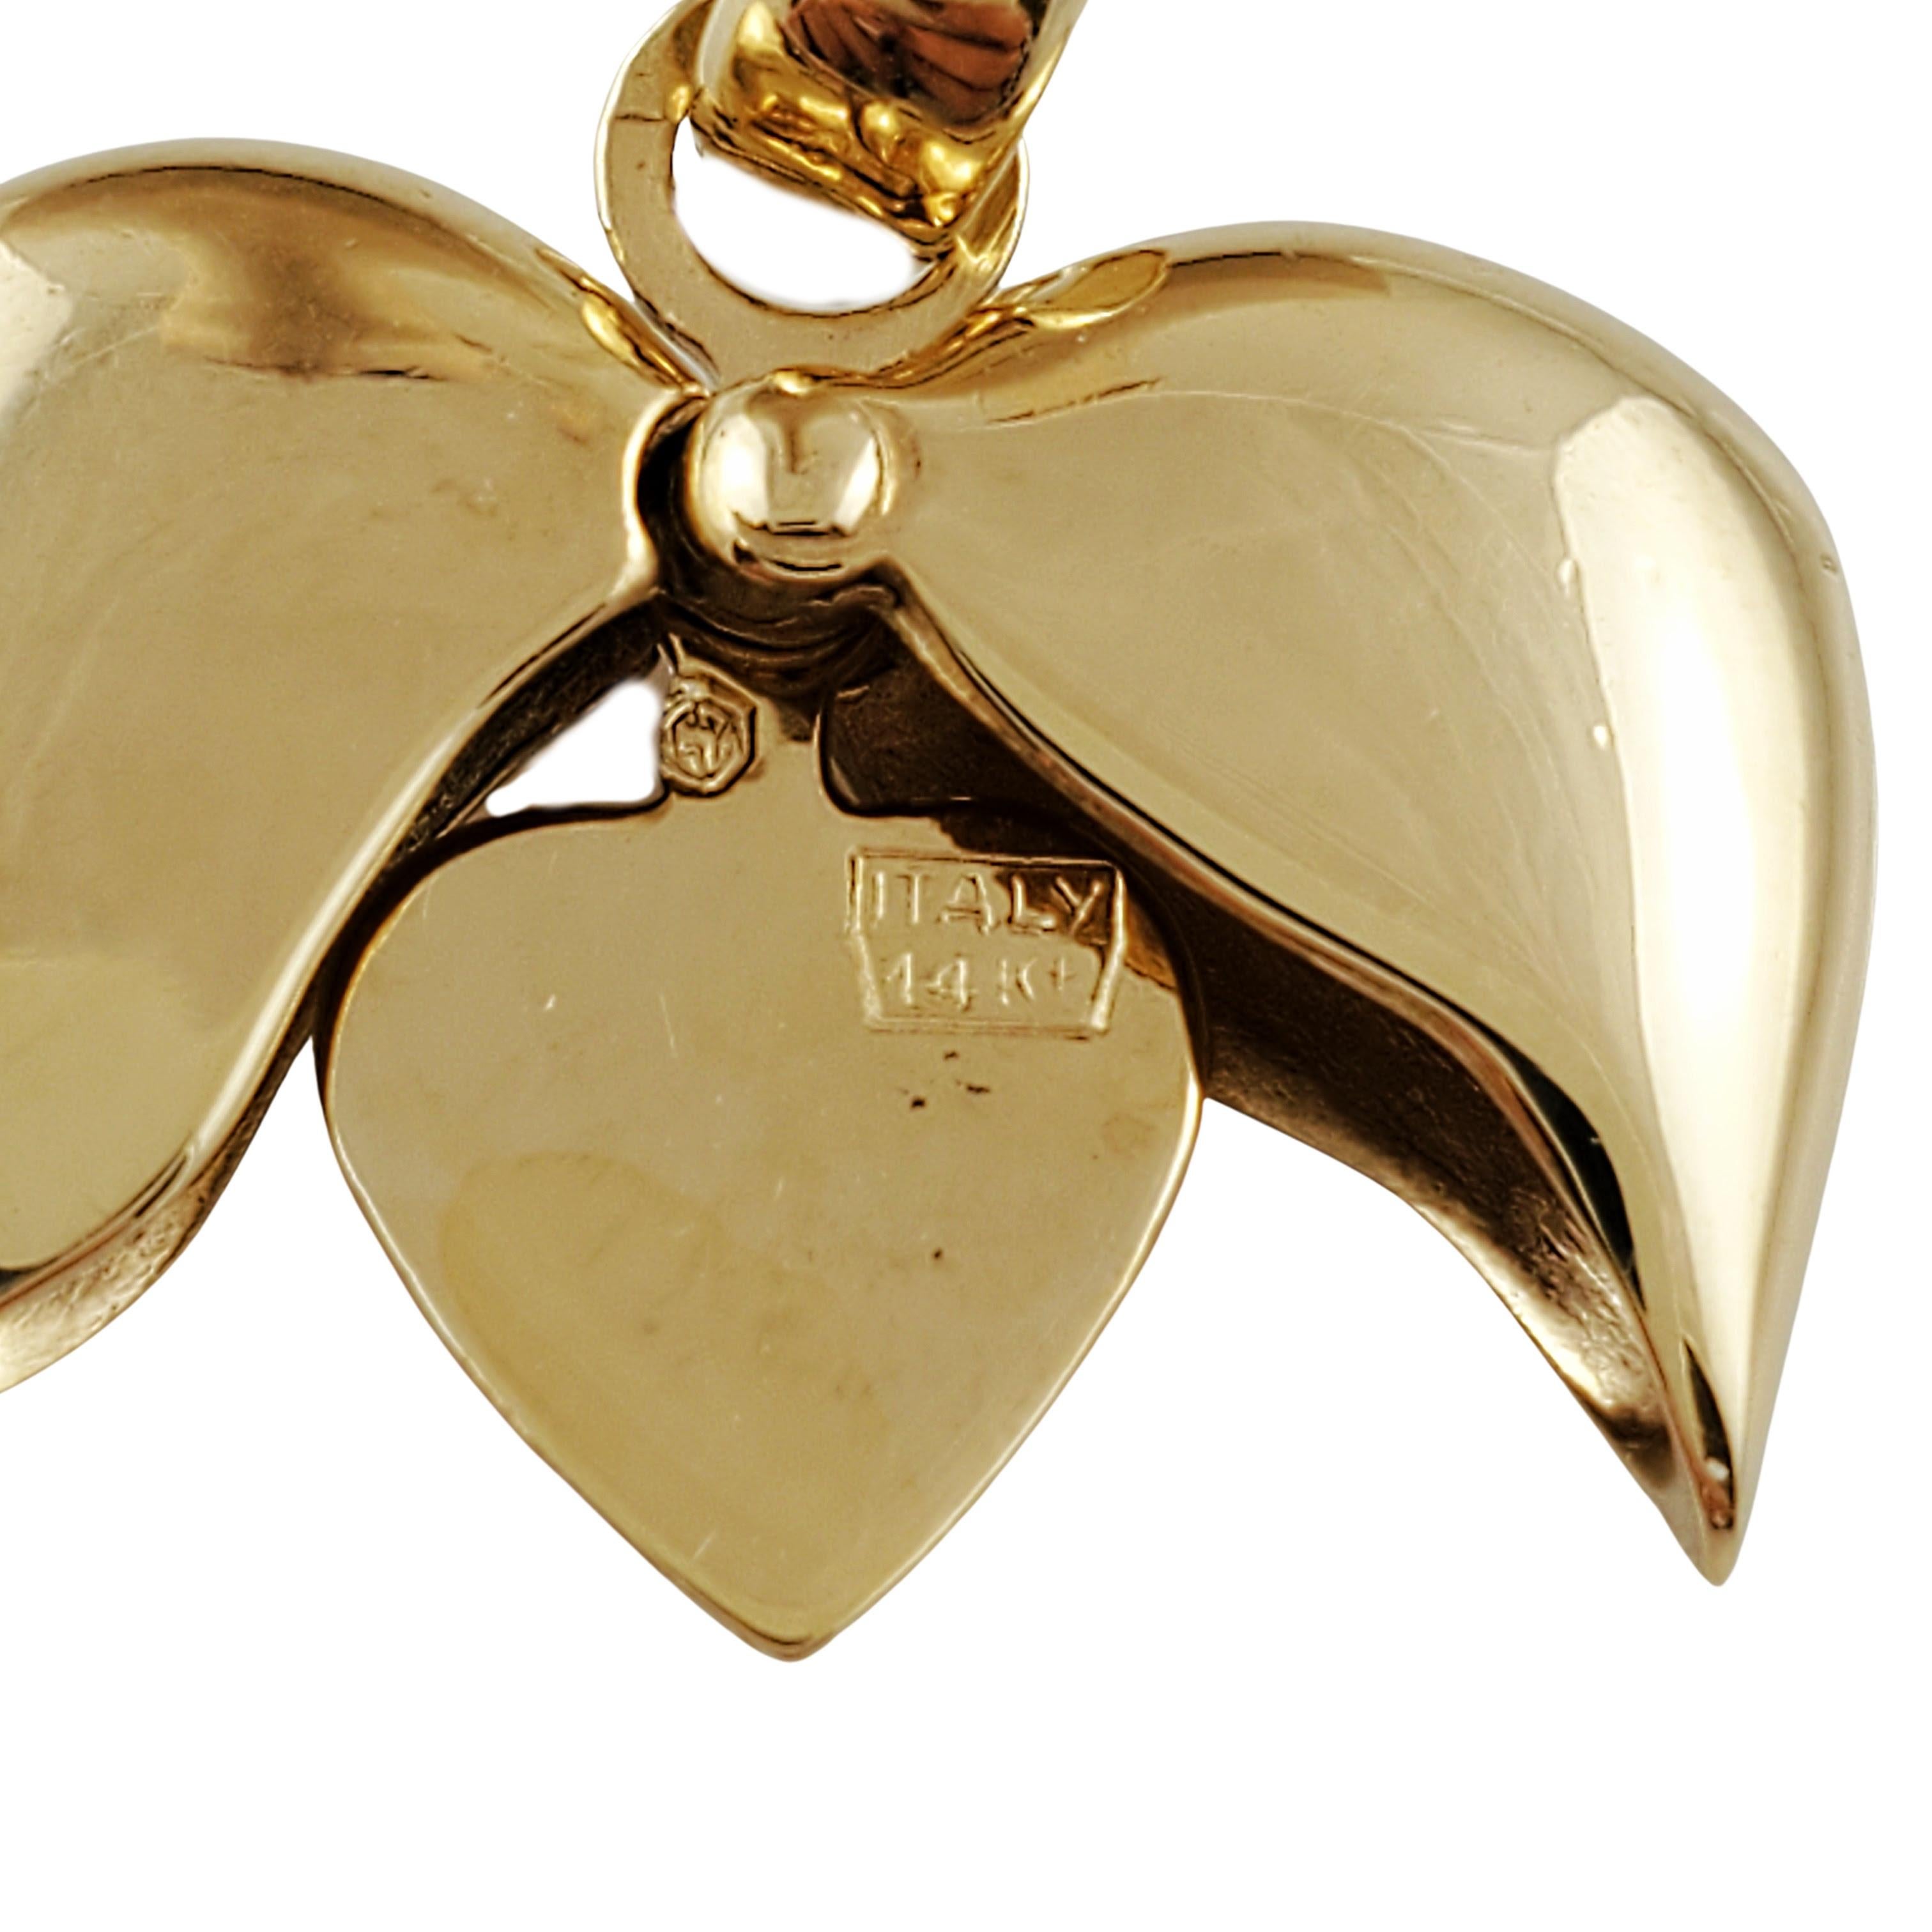 Vintage 14K Yellow Gold I Love You Heart Charm 1